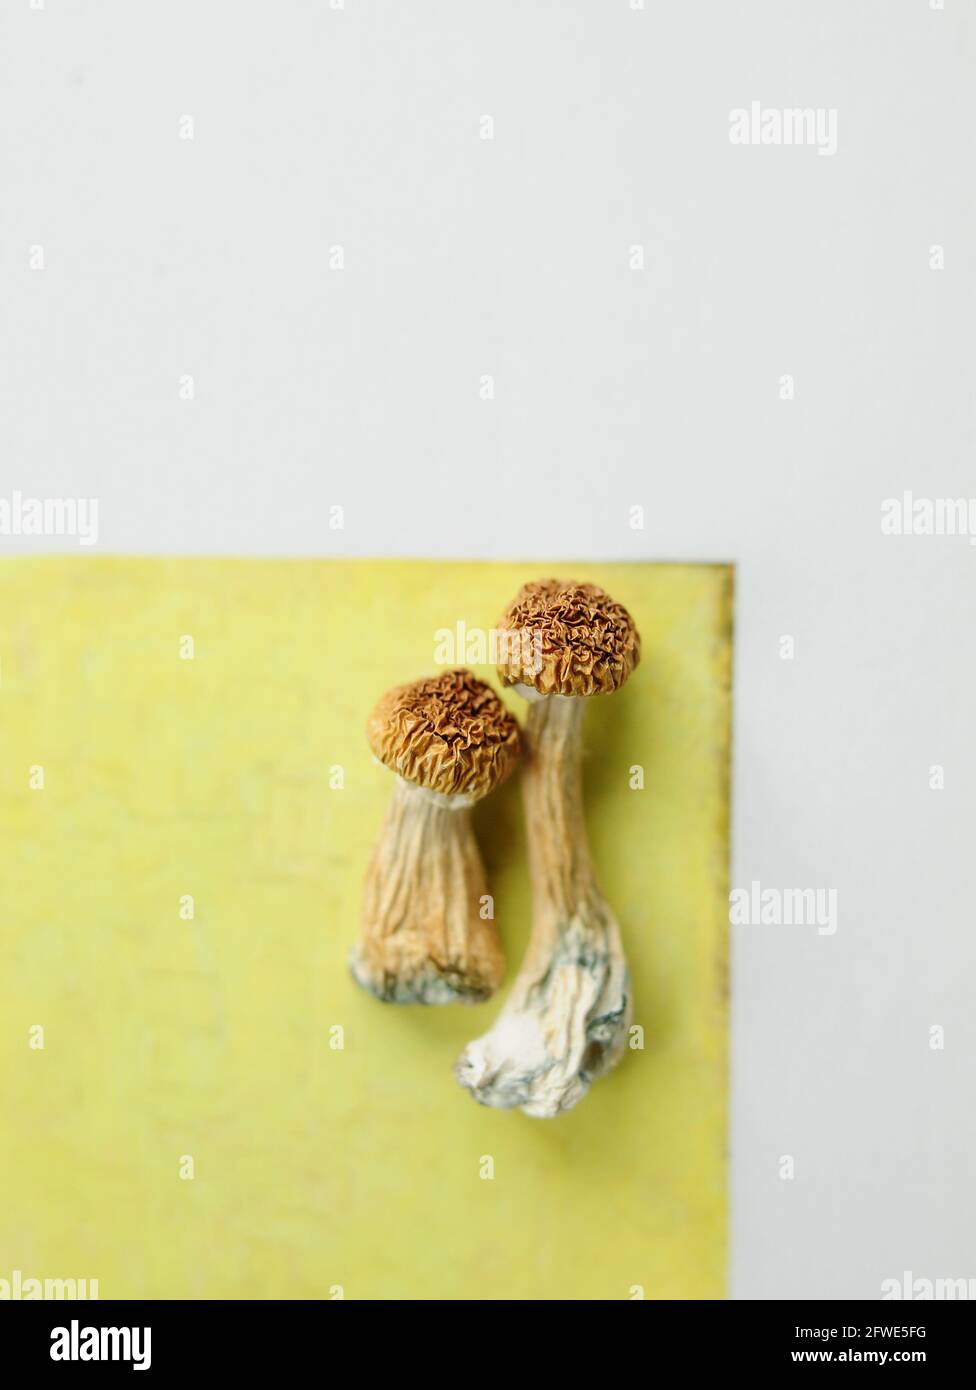 Psilocybe Cubensis mushrooms isolated on yellow background. Psilocybin psychedelic magic mushrooms Golden Teacher. Dried organic shrooms with white co Stock Photo